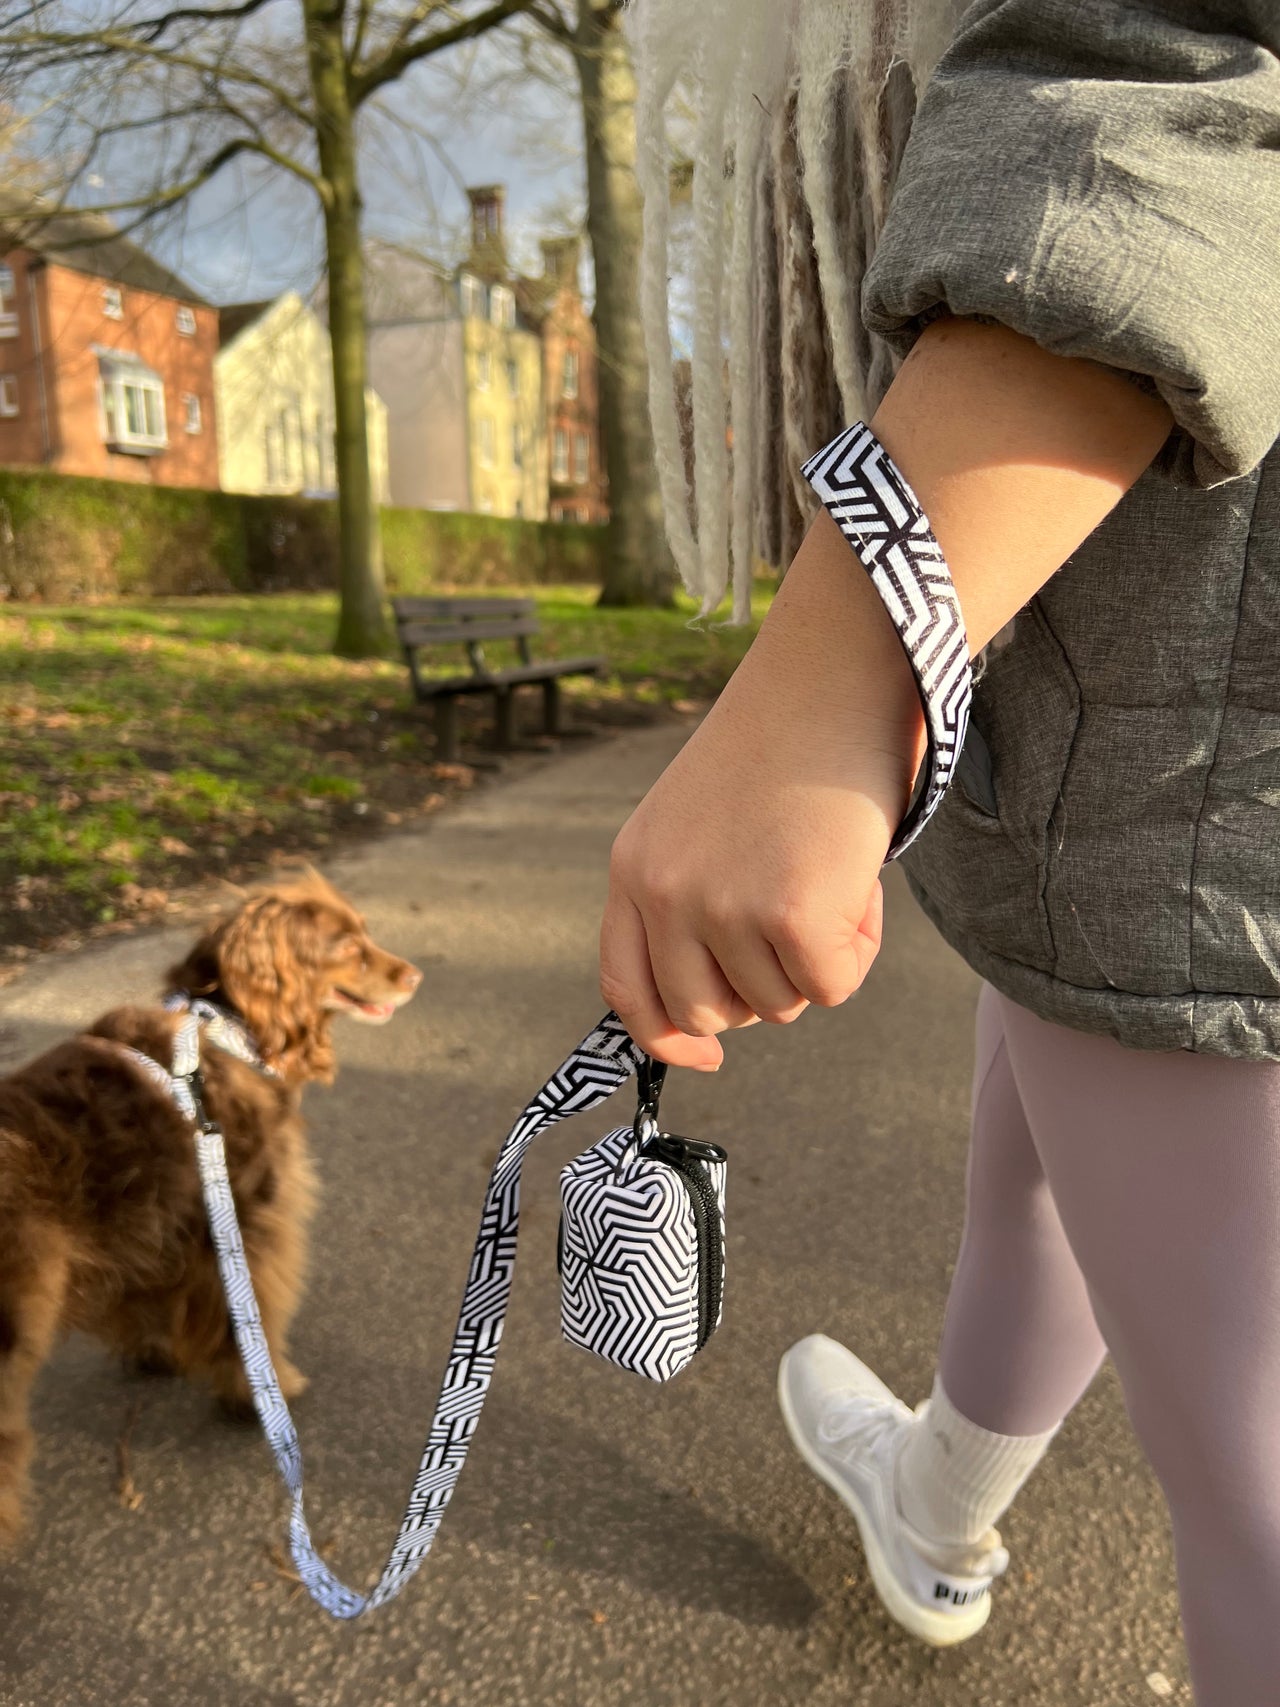 A stylish dog and owner strutting their stuff in the park with a TopDog just an illusion matching collar harness and poo bag holder set